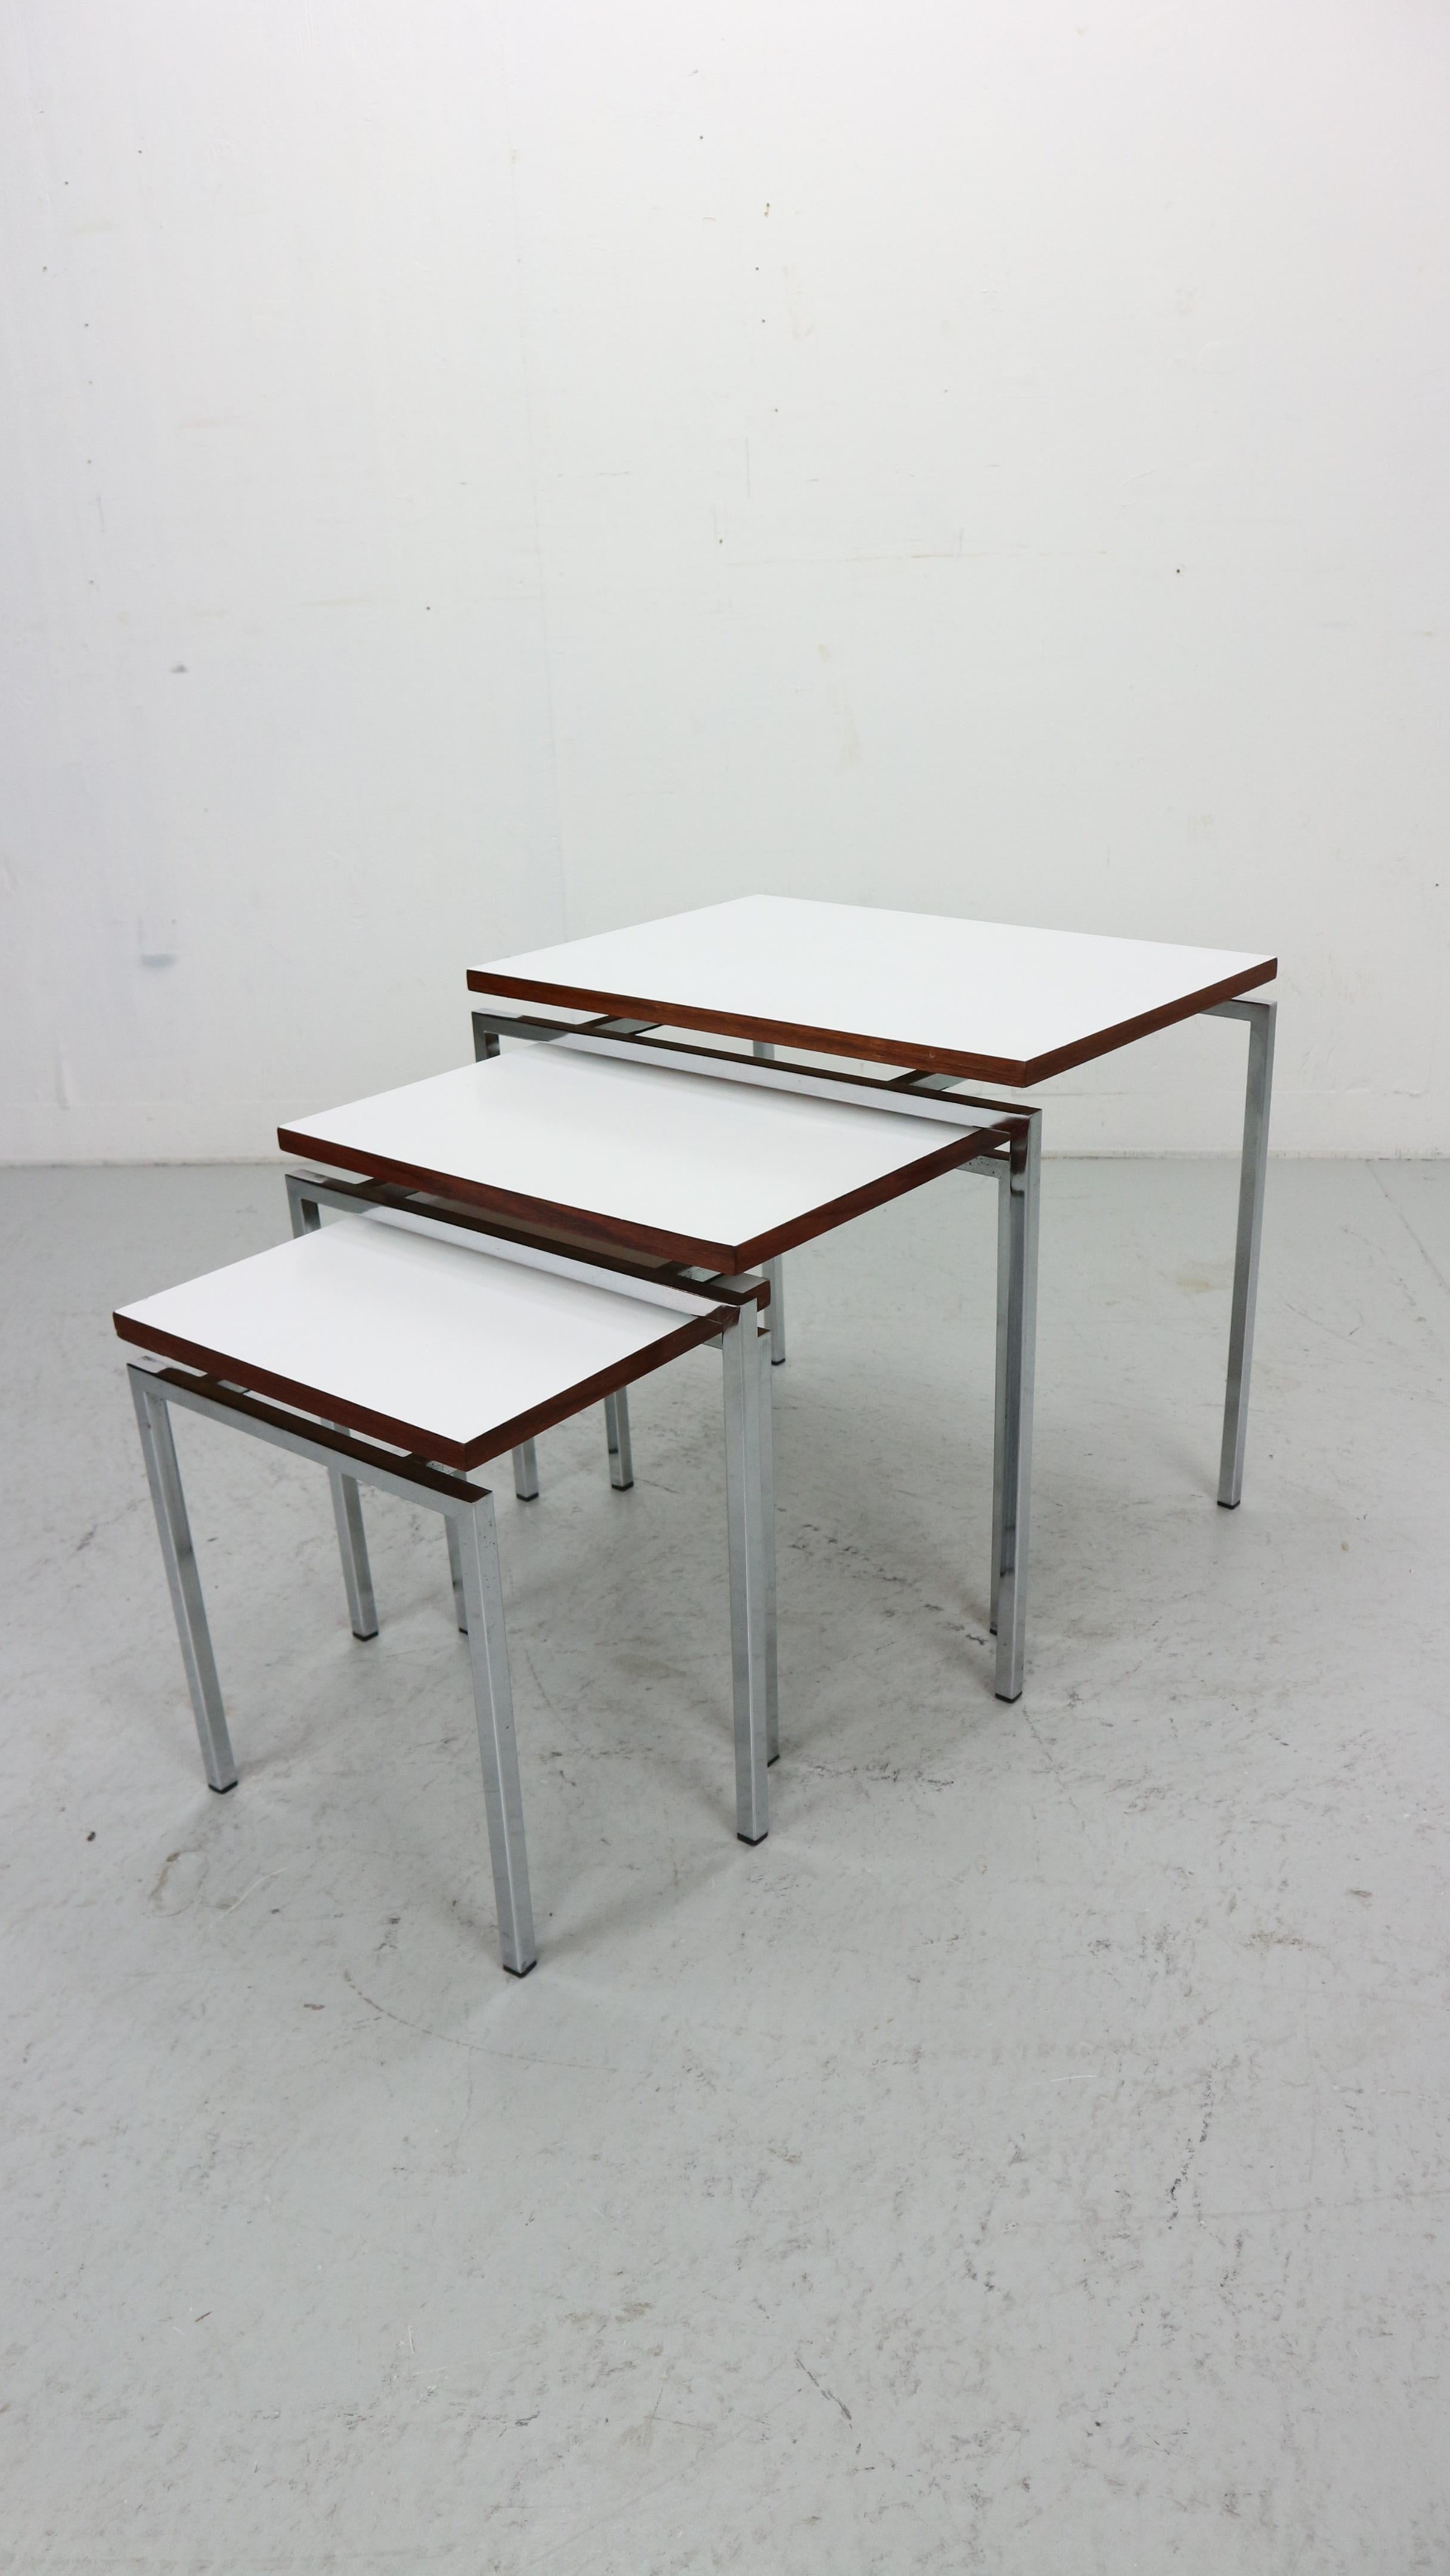 Stiemsma White Nesting Table Set, made in the Netherlands.

Floating top in white formica with dark wooden edges on chromed frame.

by the 60s furniture factory  HH de Klerk & Zonen’ 

Very good condition.

